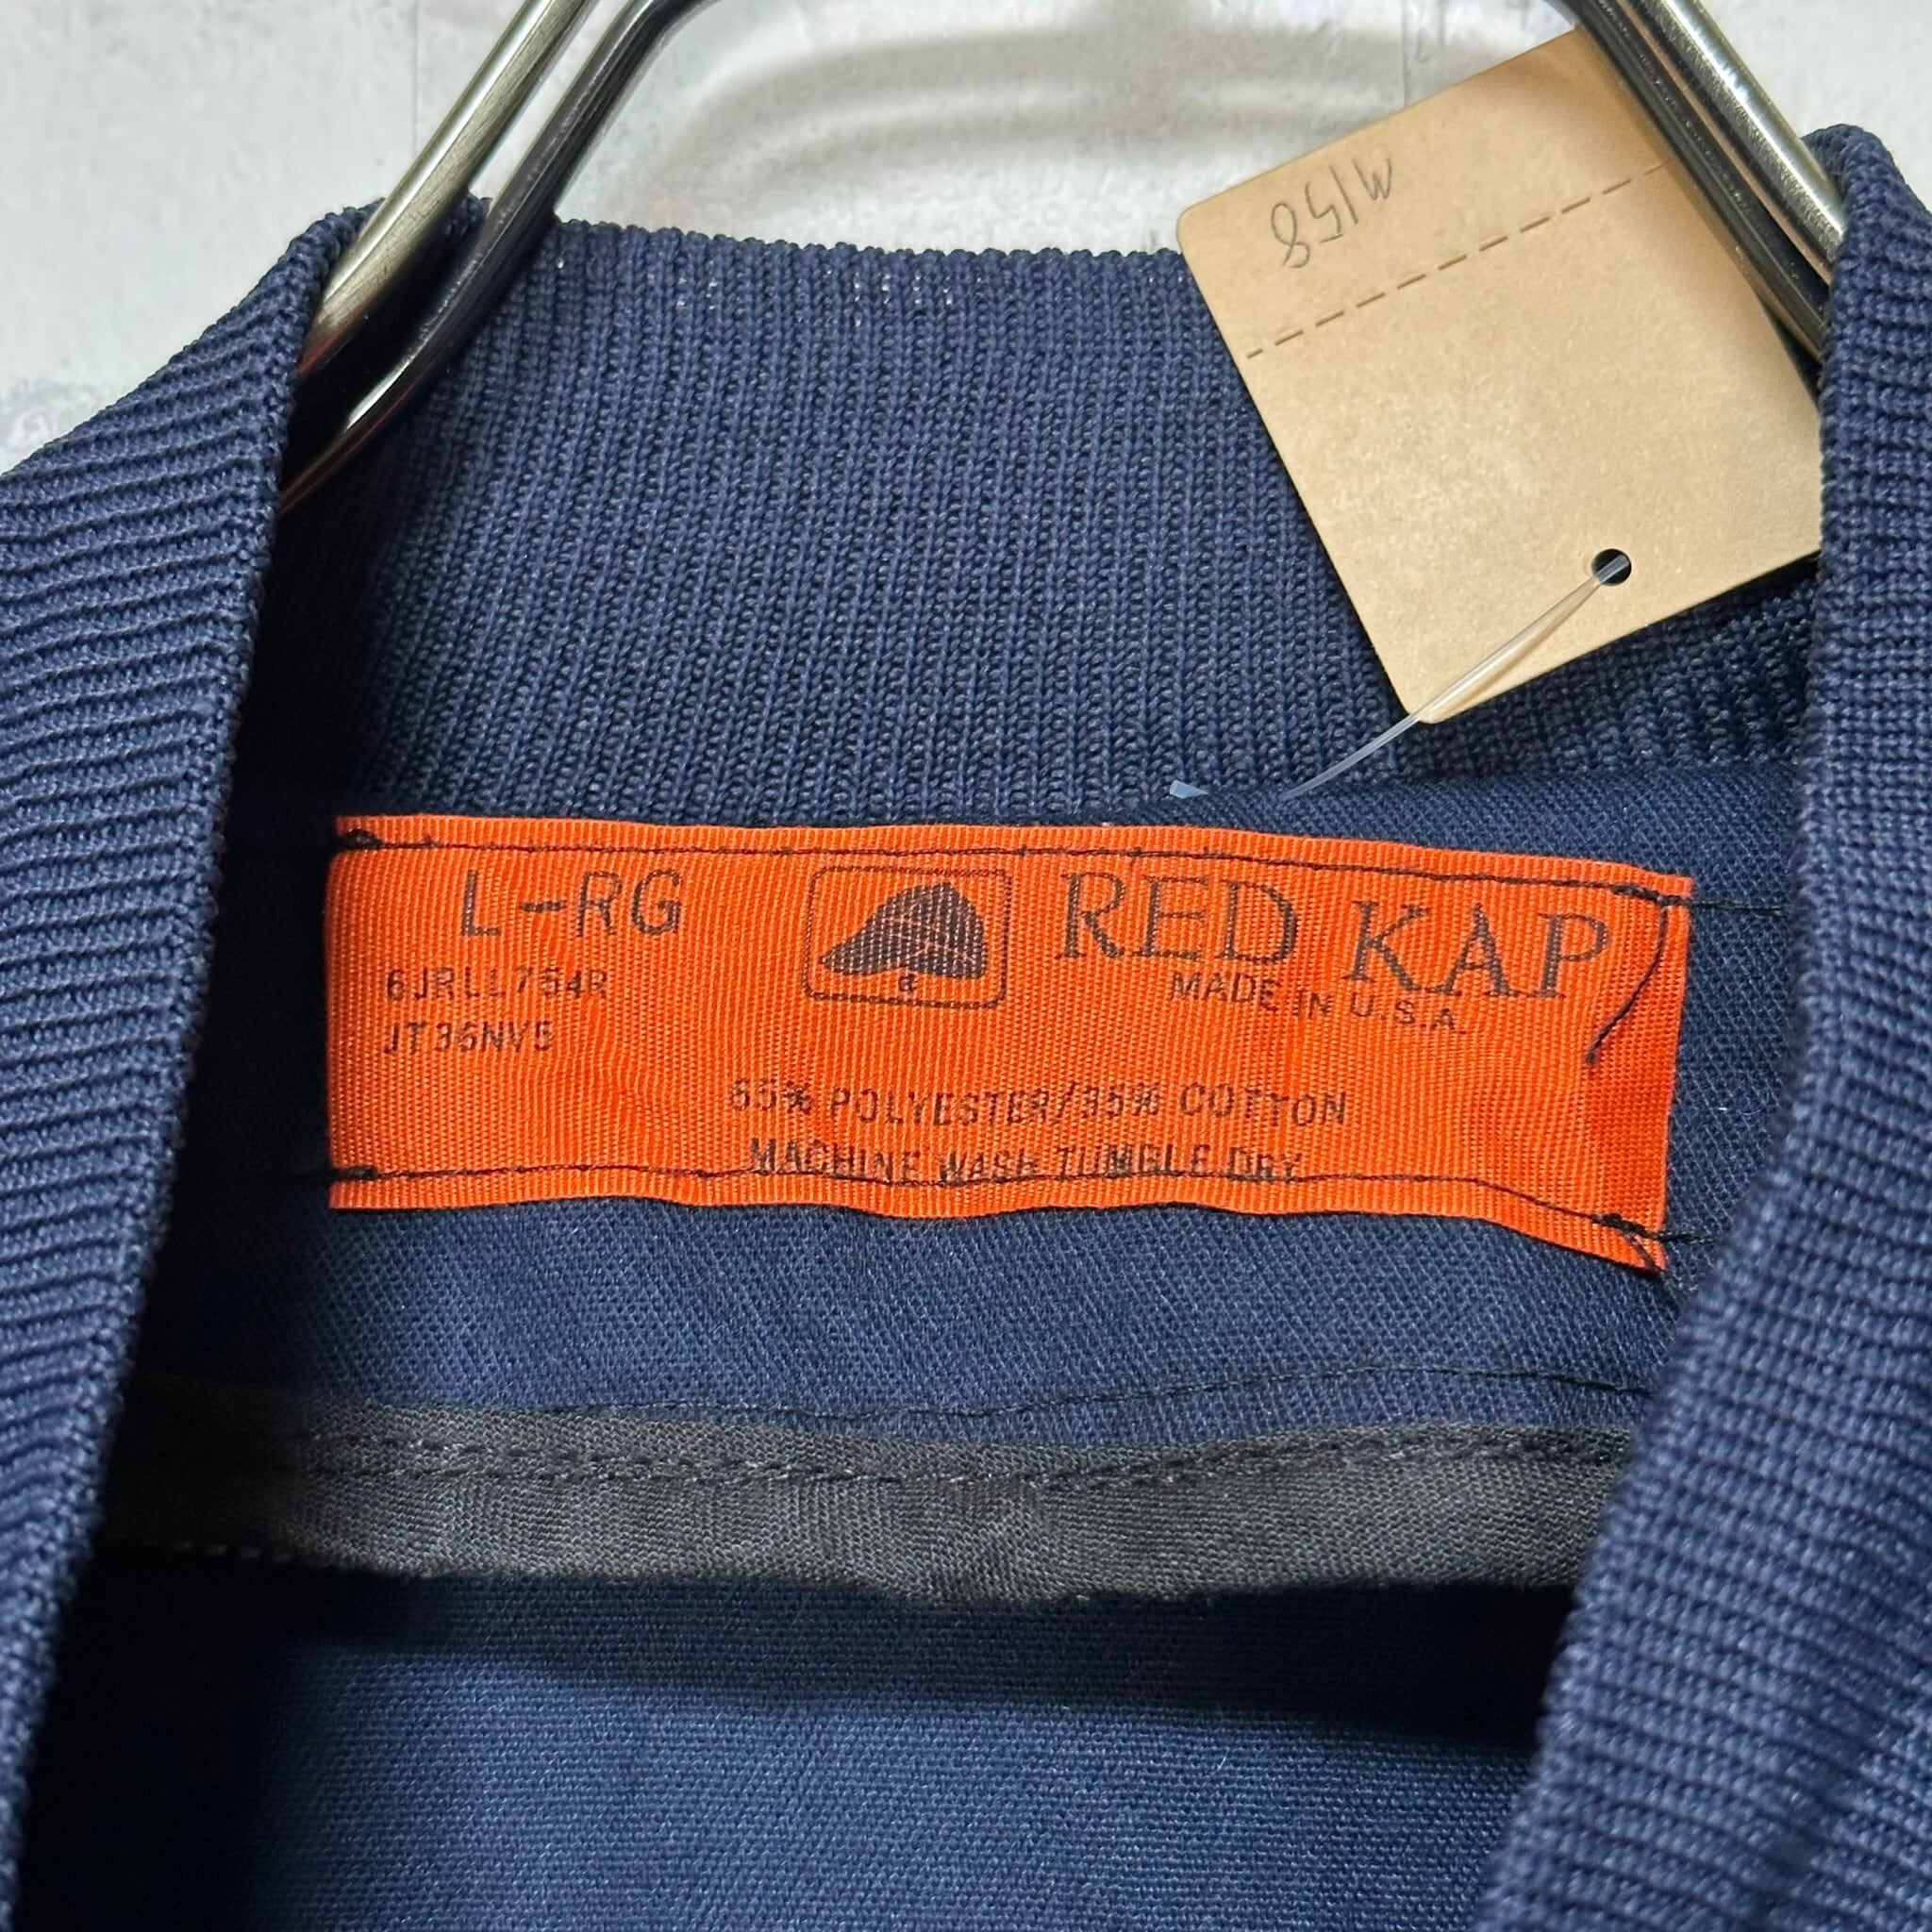 Made in USA】RED KAP ワークジャケット L 刺繍 | 古着屋OLDGREEN